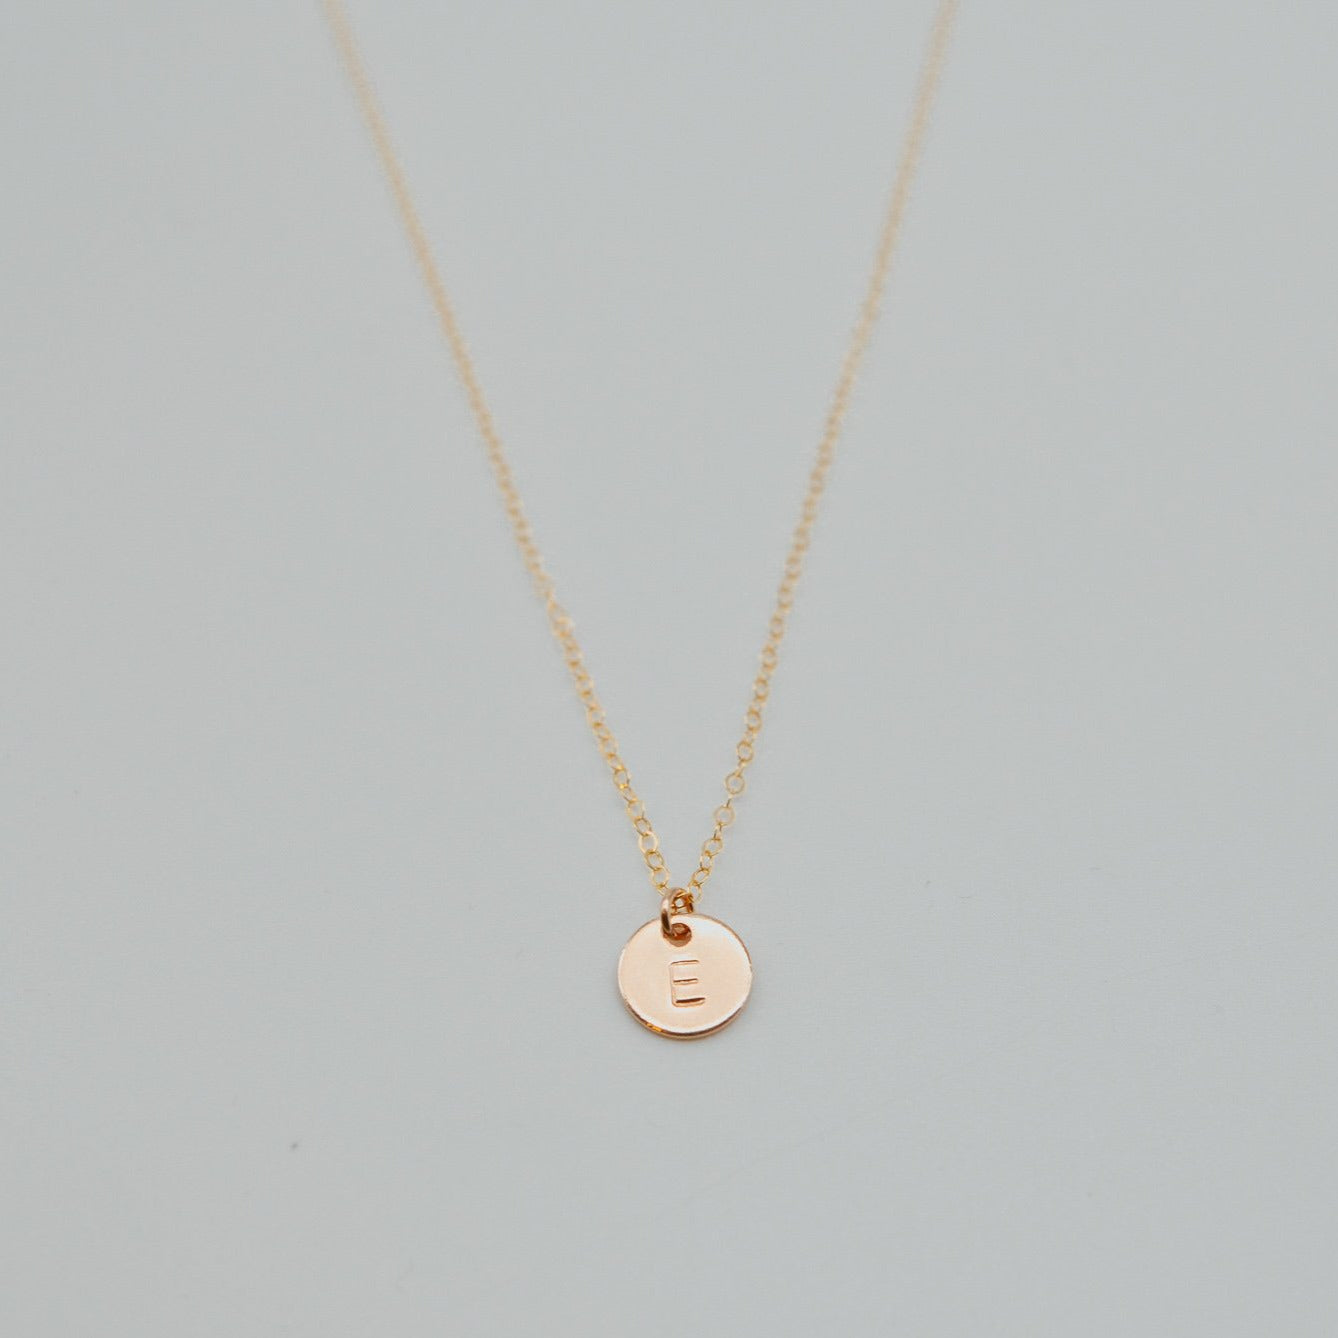 Medium Hand-Stamped Initial Necklace | Dee Ruel Jewelry